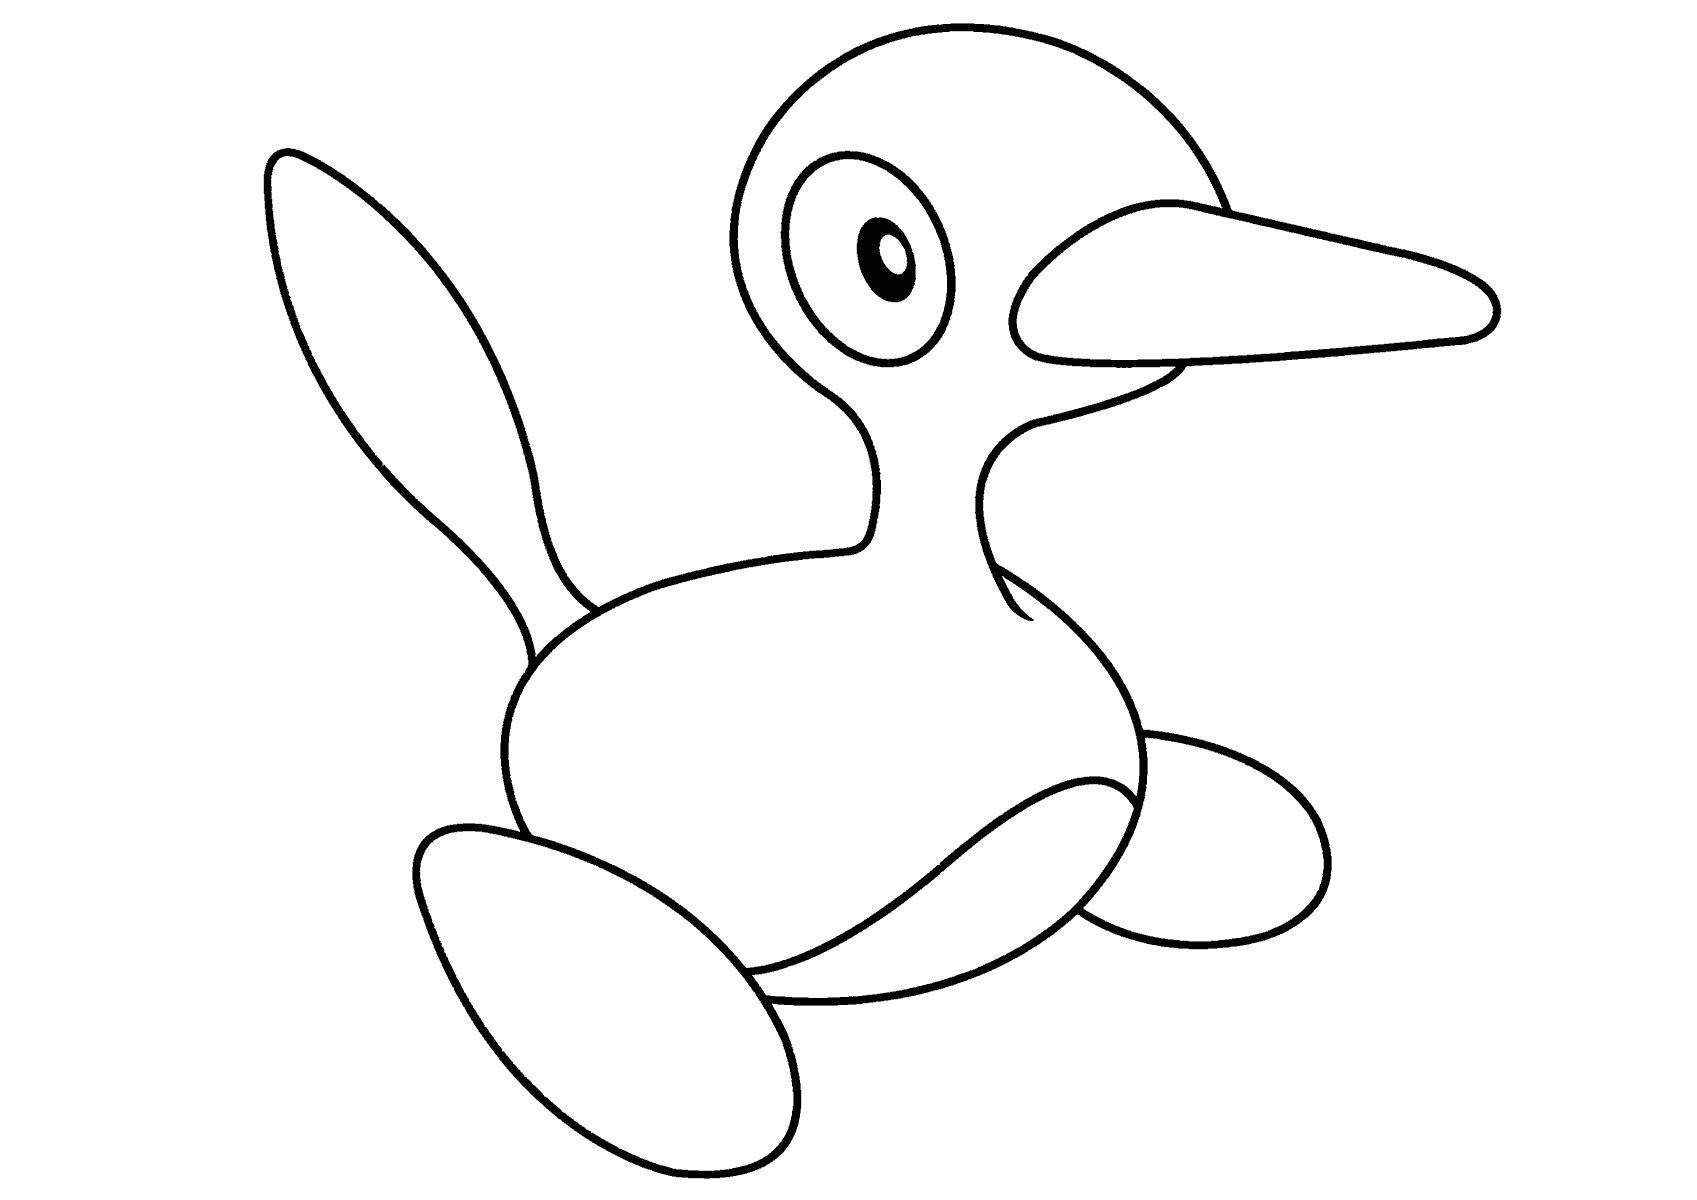 coloring page: Porygon2 is an intelligent, versatile Pokemon with the ability to learn human speech and change its form to adapt. It evolves from Porygon.